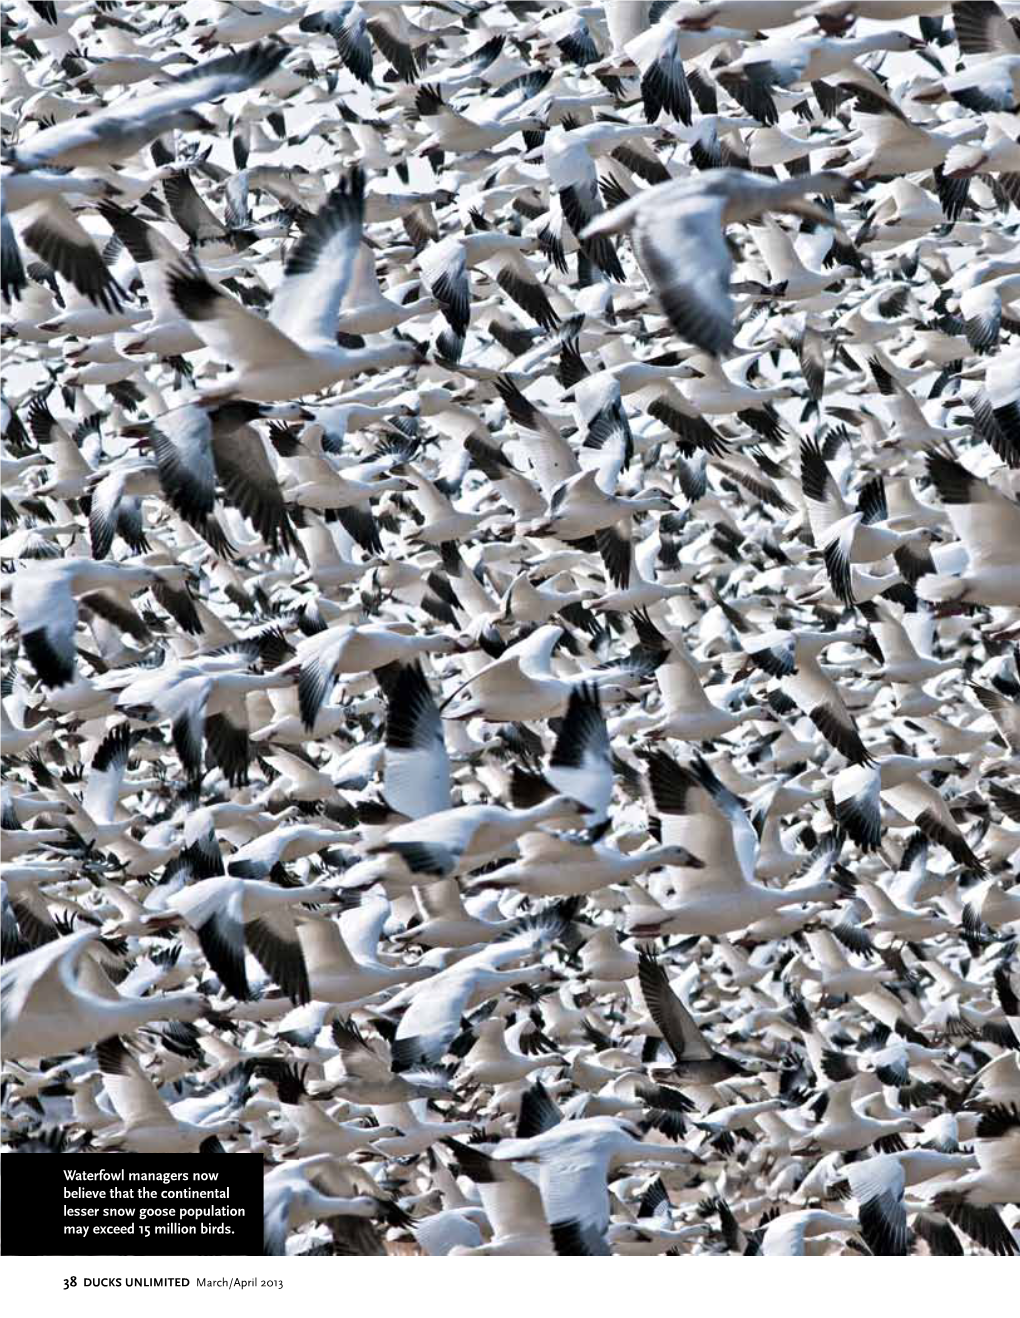 Light Goose Dilemma Despite Increased Harvests, Populations of These Arctic-Nesting Geese Continue to Grow